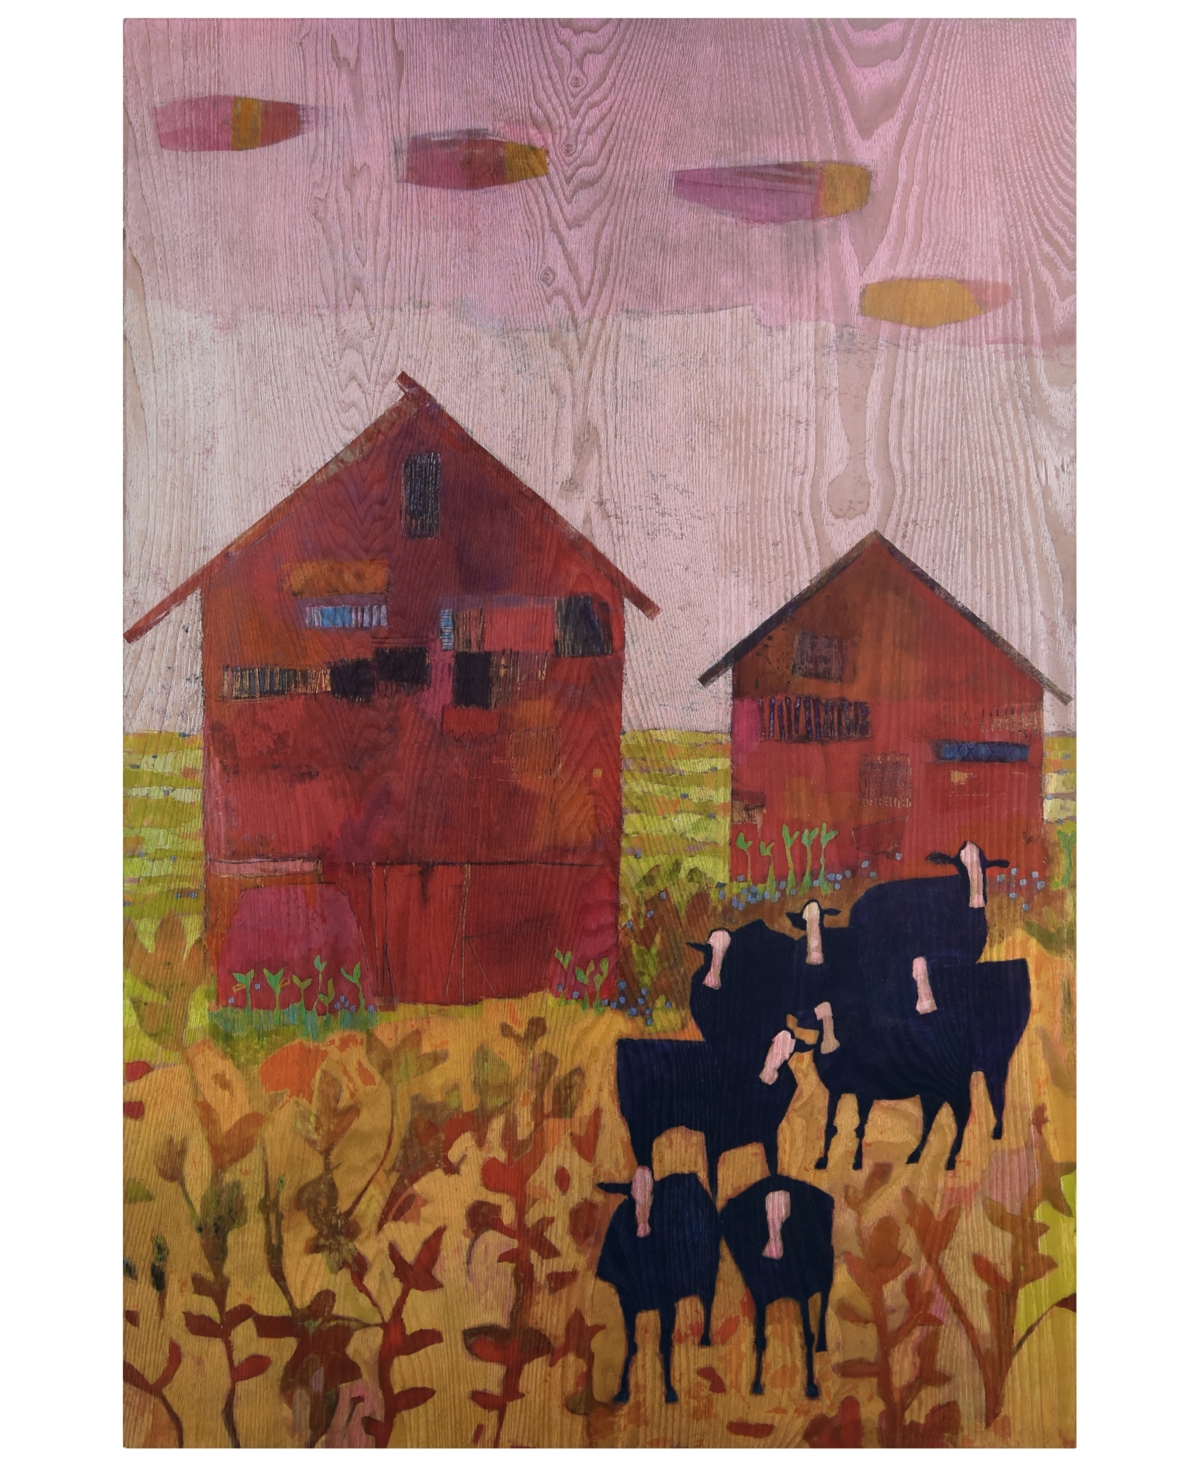 Empire Art Direct "orland Barnyard" Fine Giclee Printed Directly On Hand Finished Ash Wood Wall Art, 36" X 24" X 1.5" In Red,orange,black